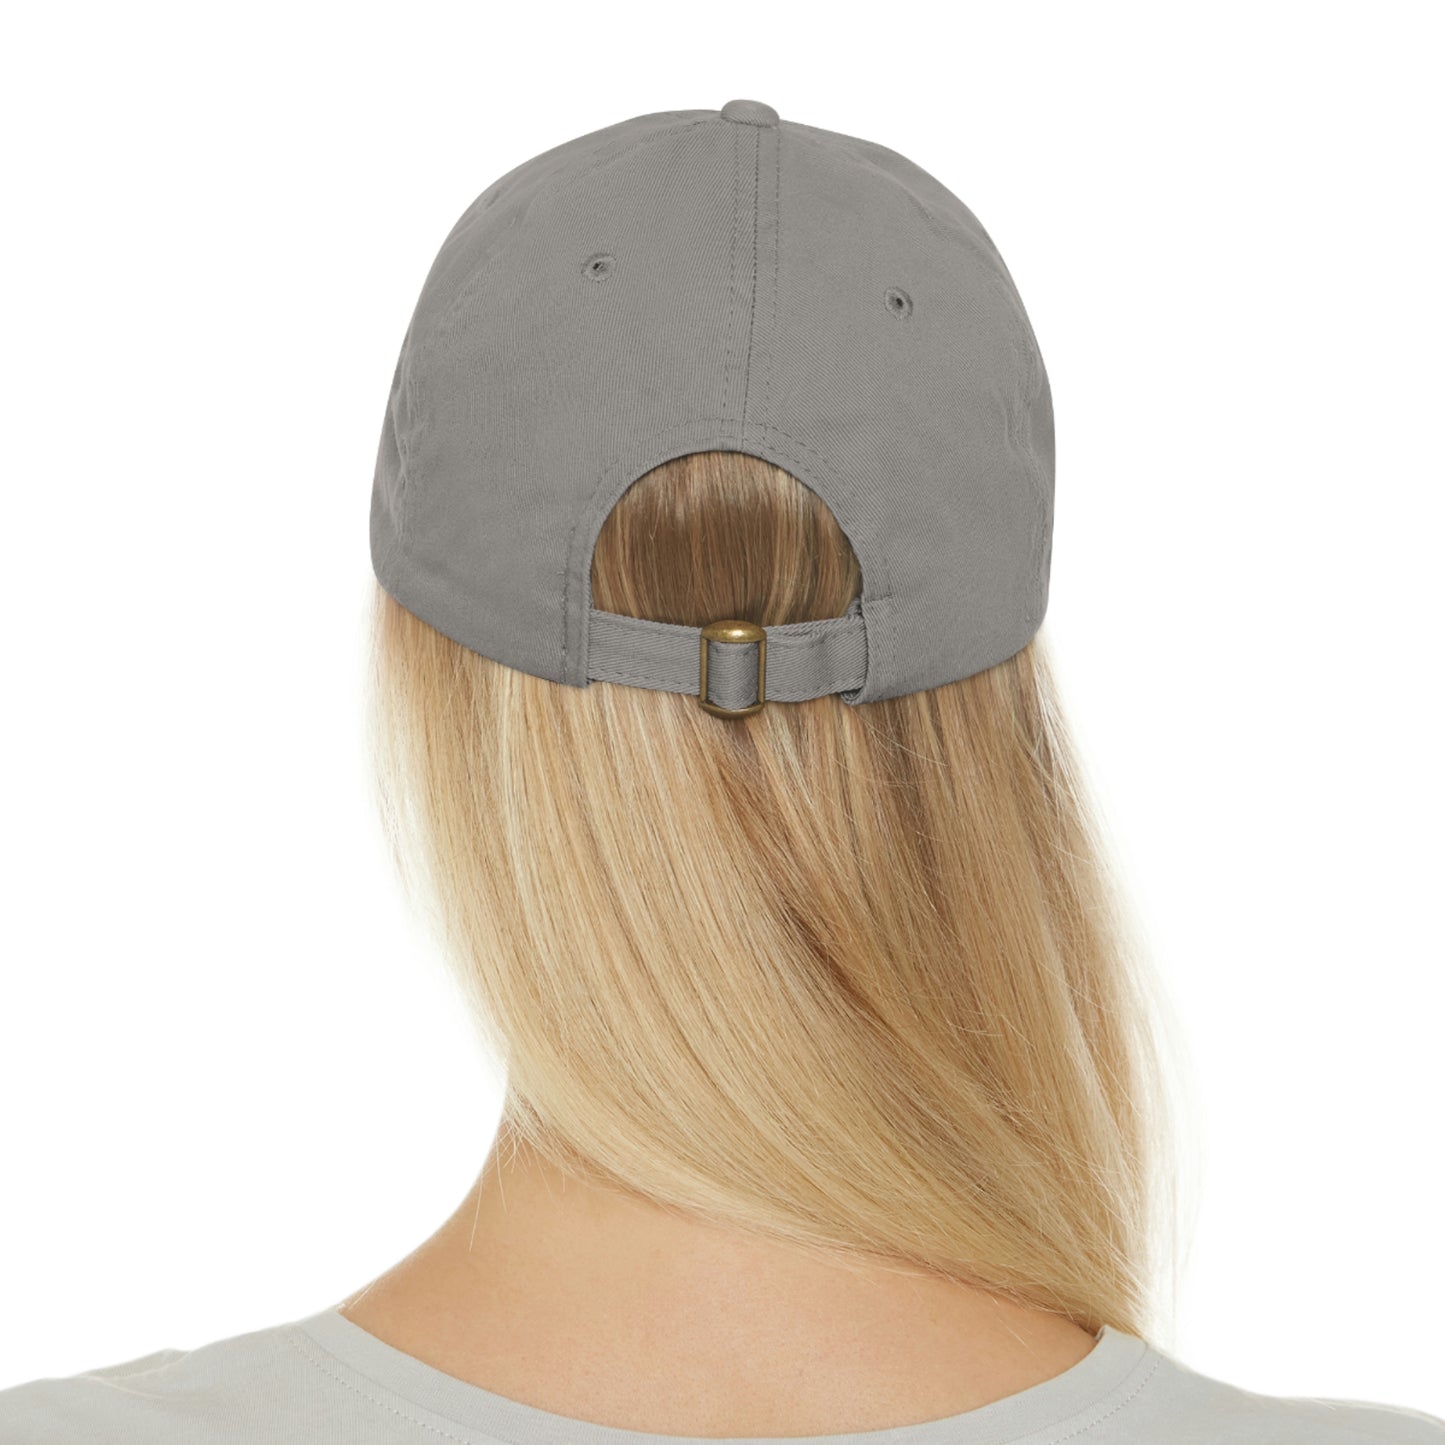 Interstellar Black Space Dad Hat with Leather Patch